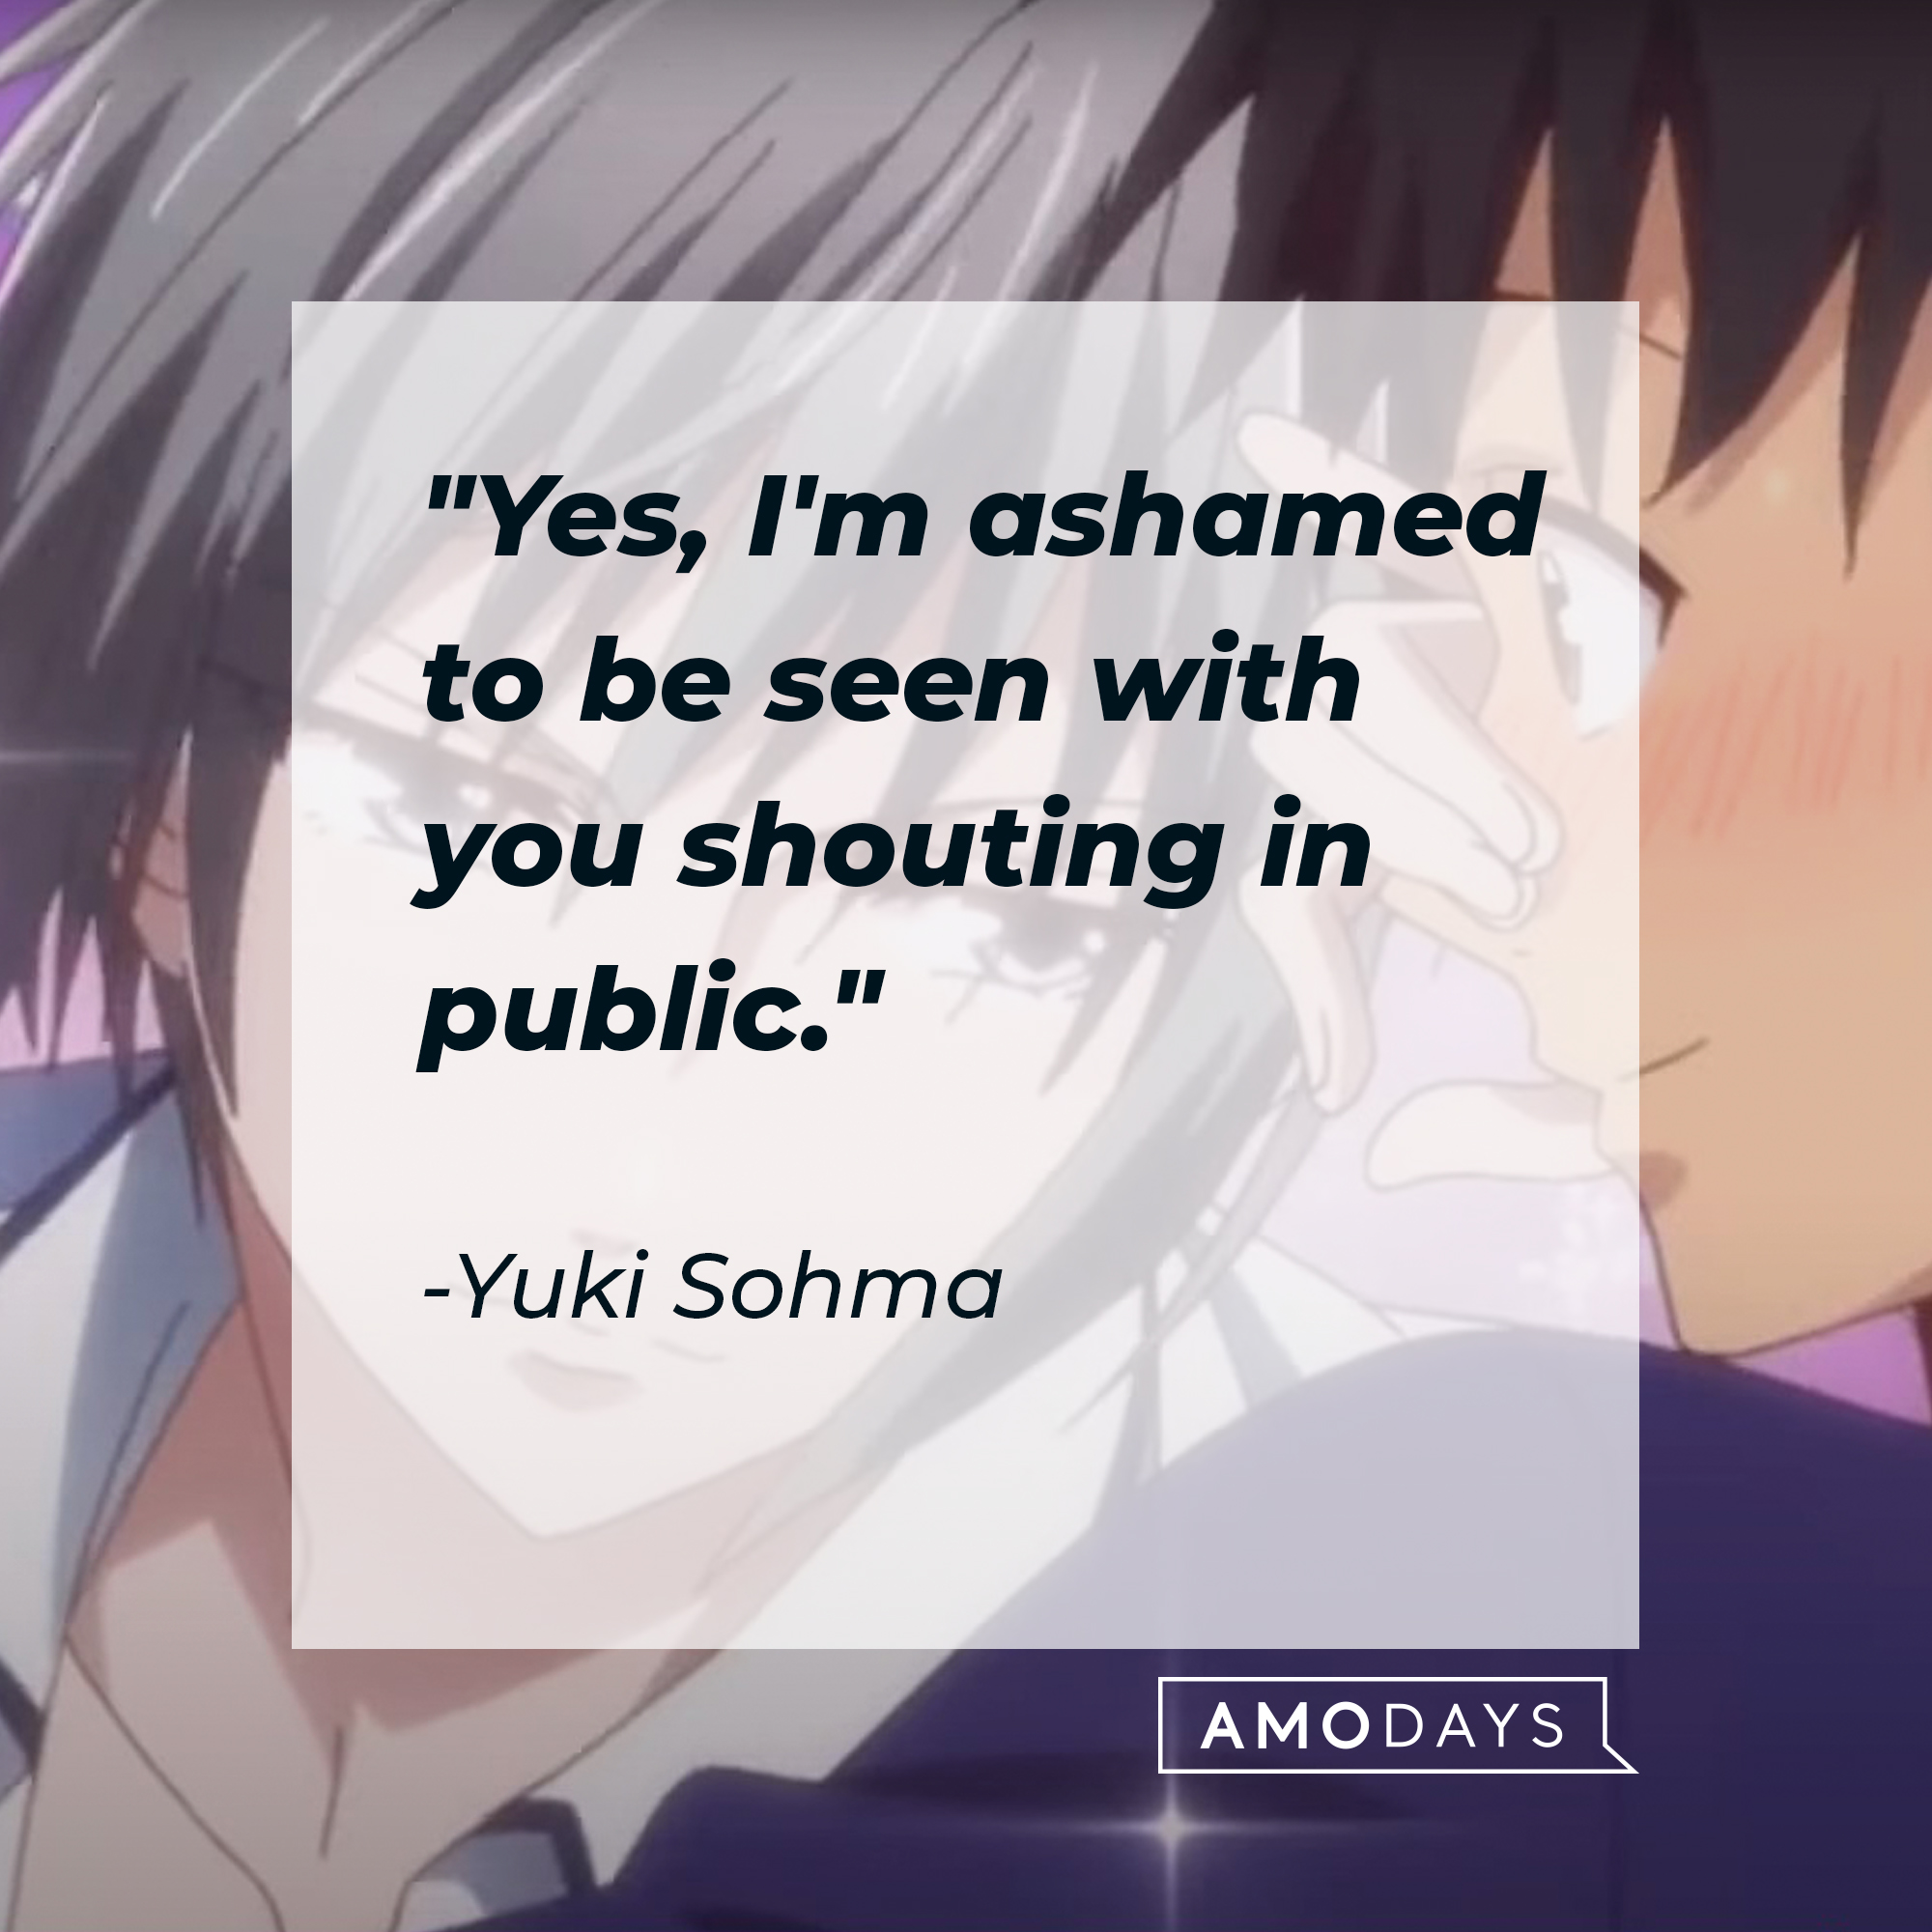 Yuki Sohma's quote: "Yes, I'm ashamed to be seen with you shouting in public." | Source: Facebook.com/FruitsBasketOfficial